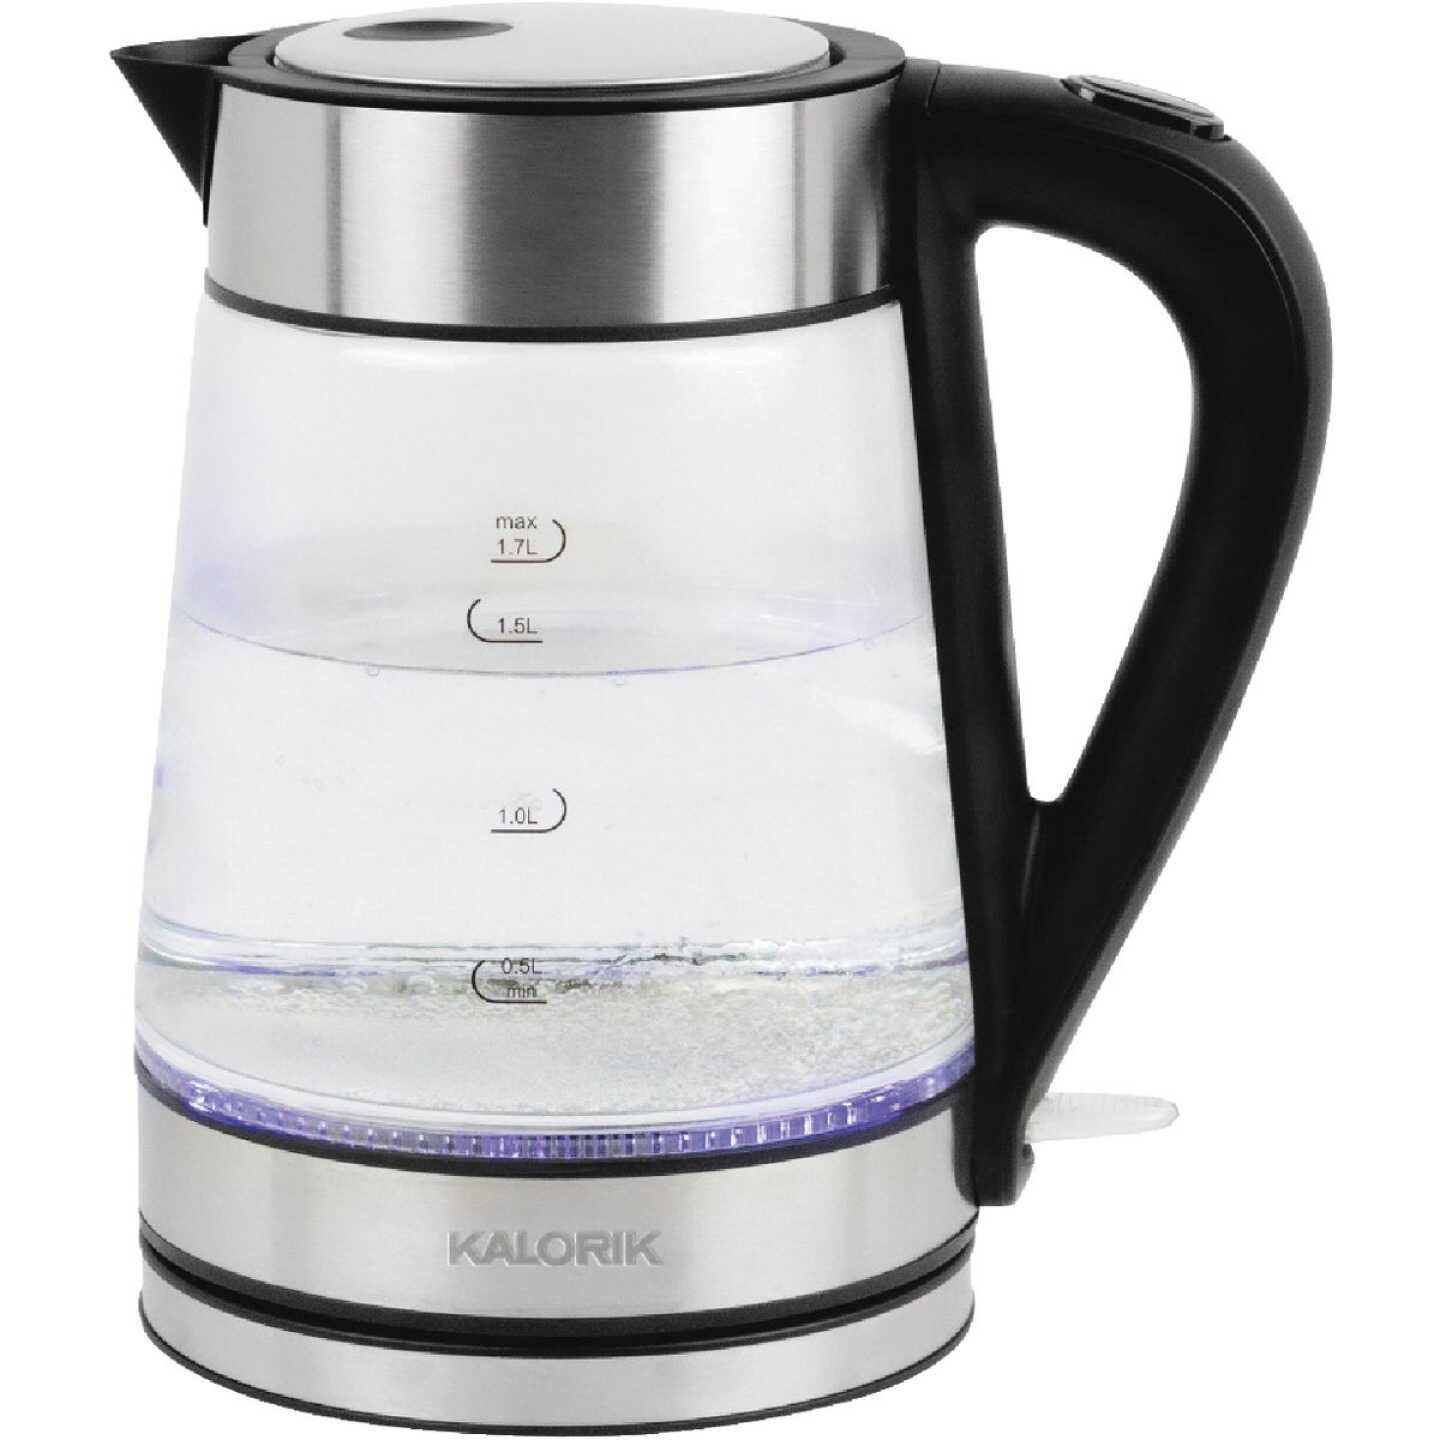 Rise By Dash 1.7 Liter Electric Kettle + Water Heater with Rapid